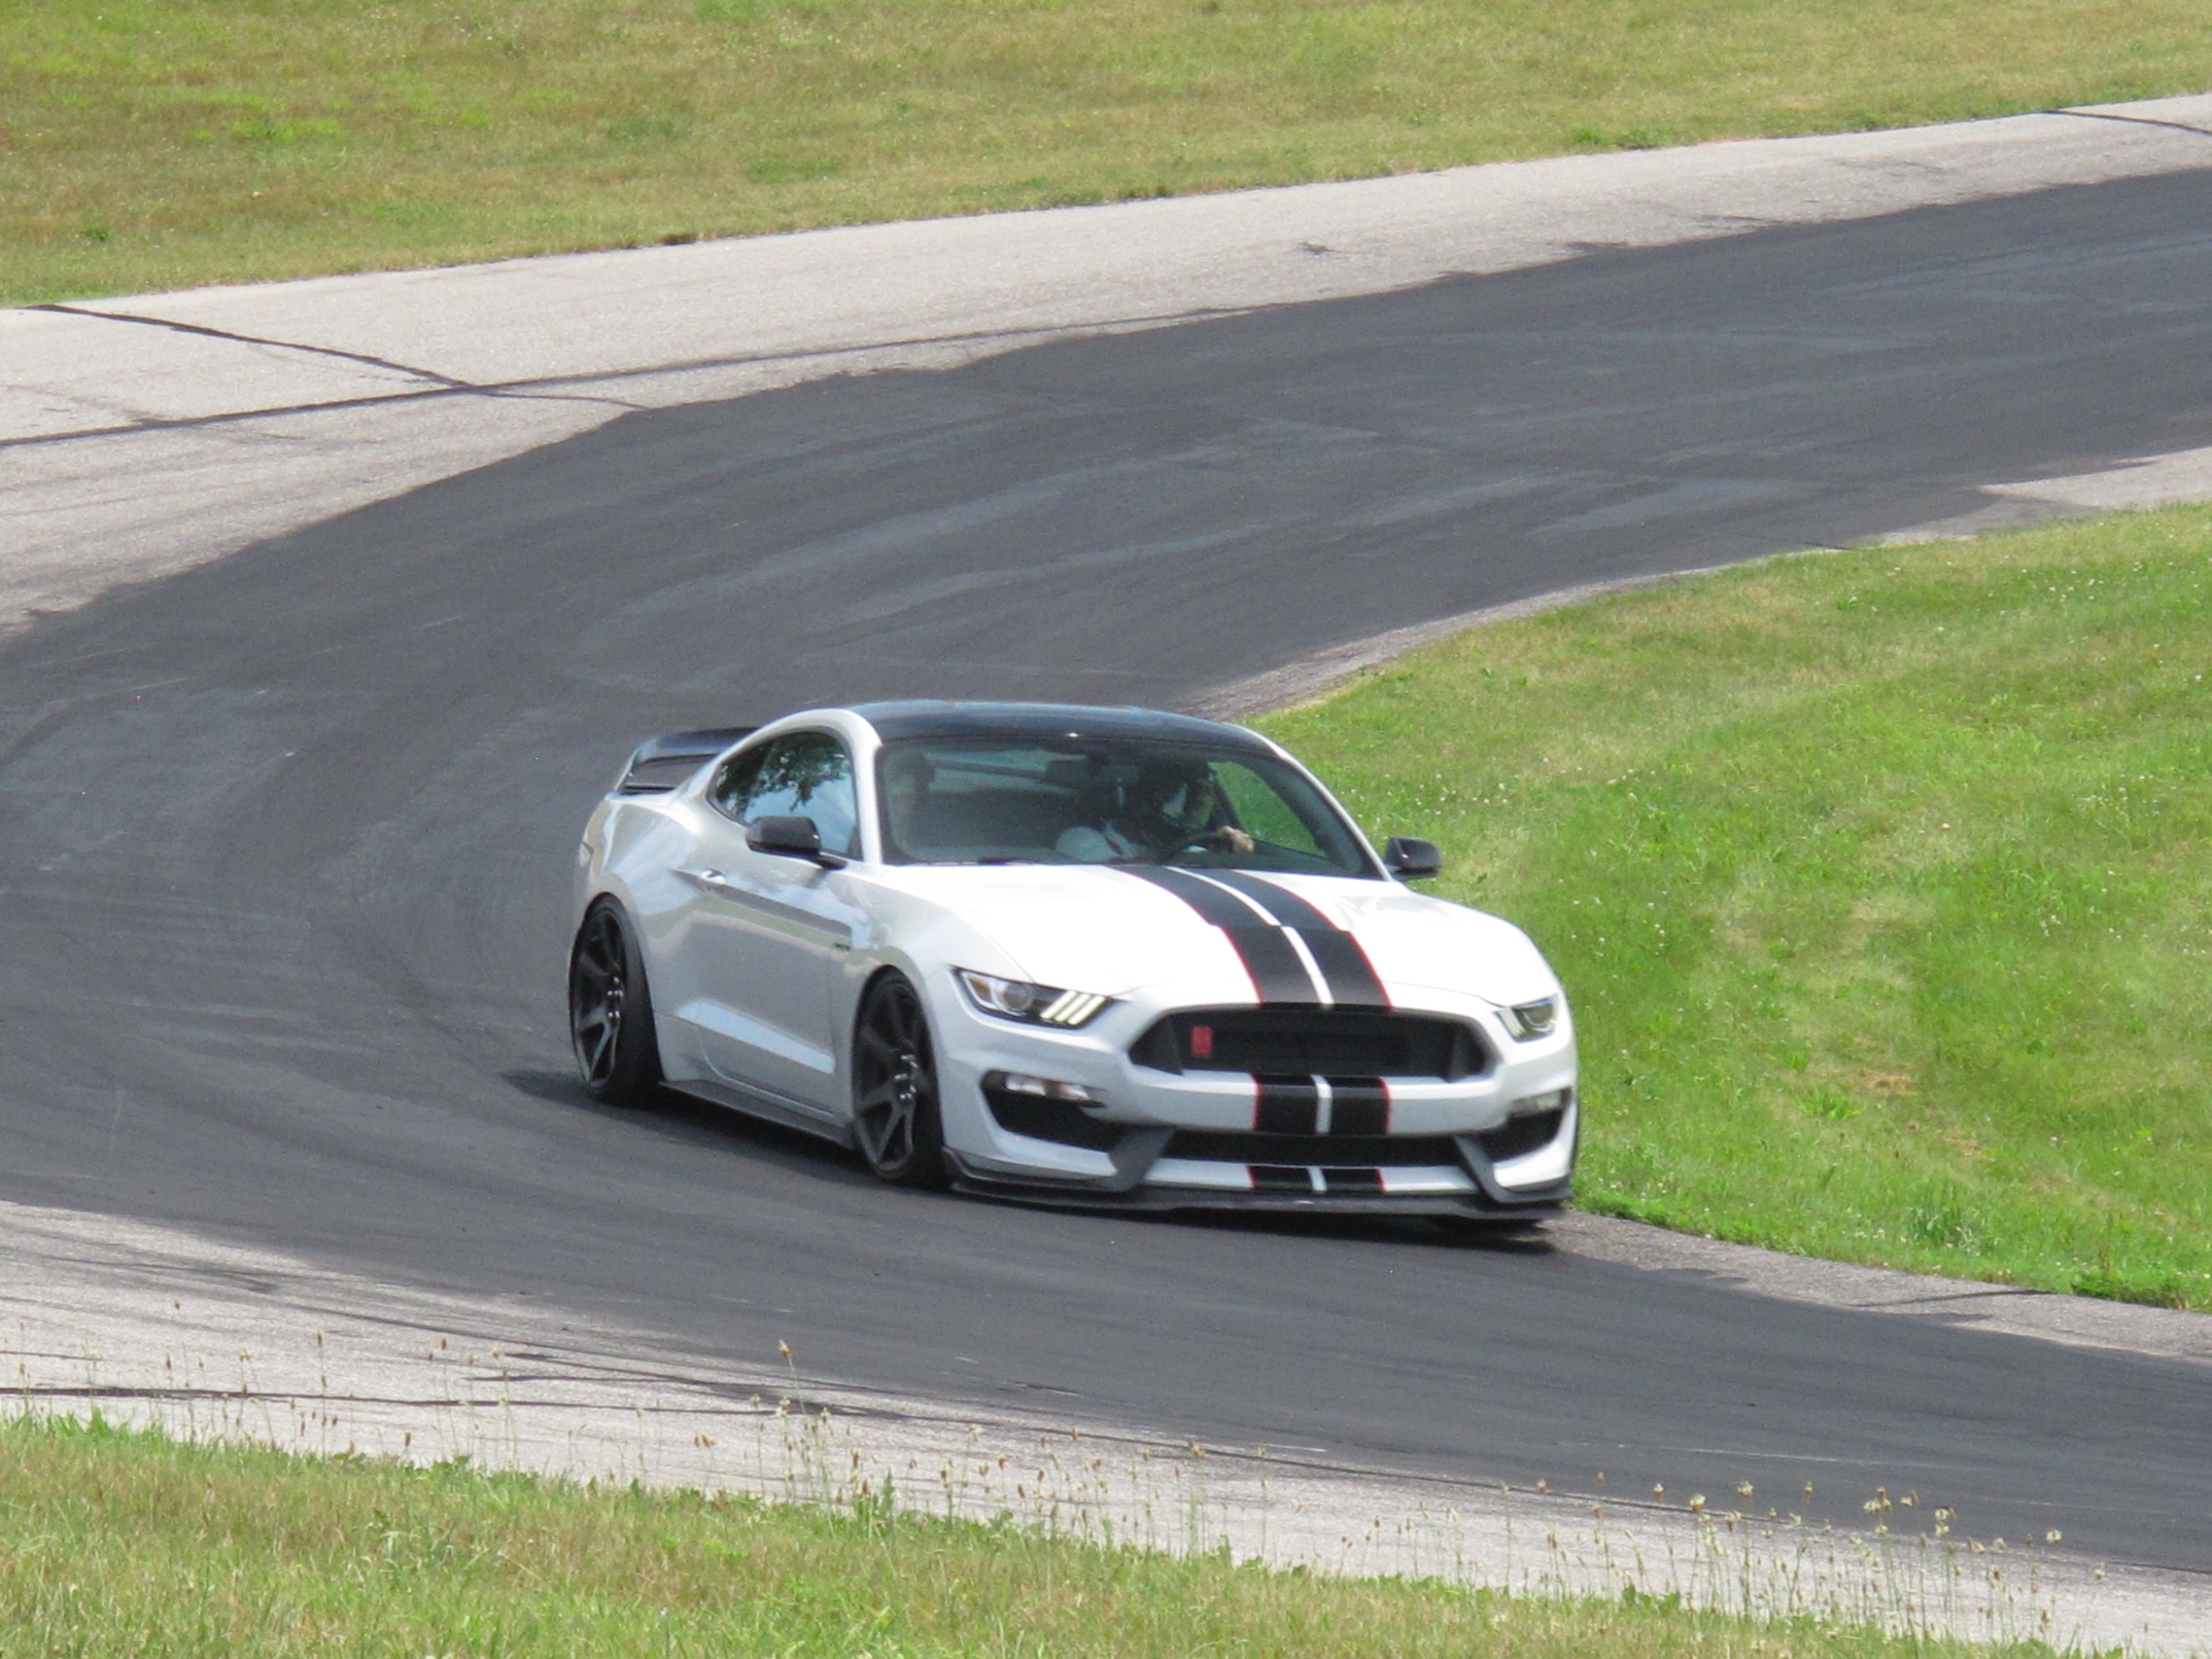 Ford Says Shelby GT350R Lap Times Match 911 GT3, Beat Camaro Z/28